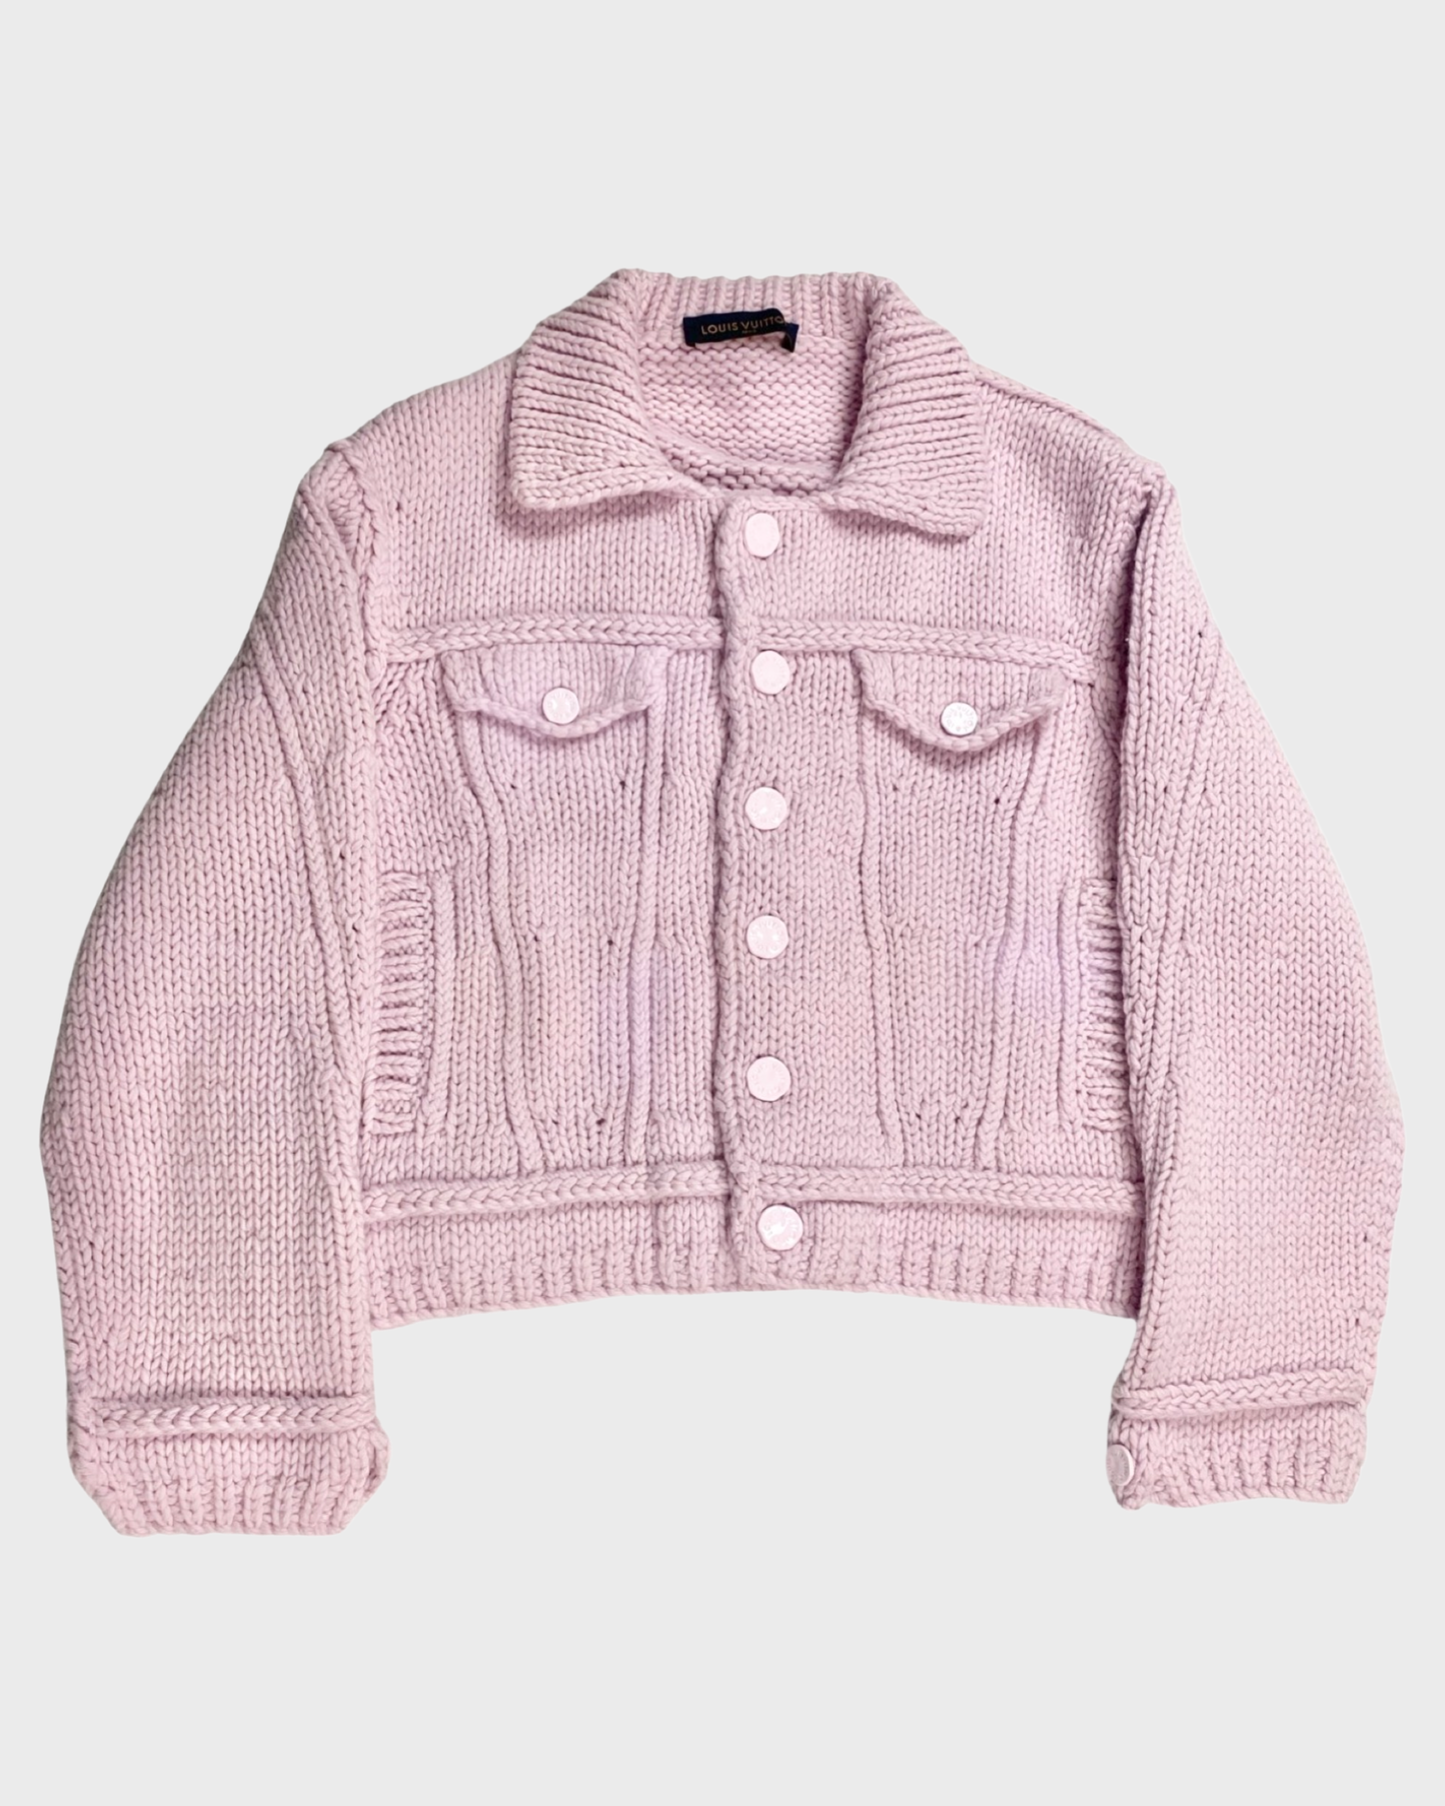 Louis Vuitton SS 2020 Rare Pink Asia Exclusive Knit Trucker Jacket